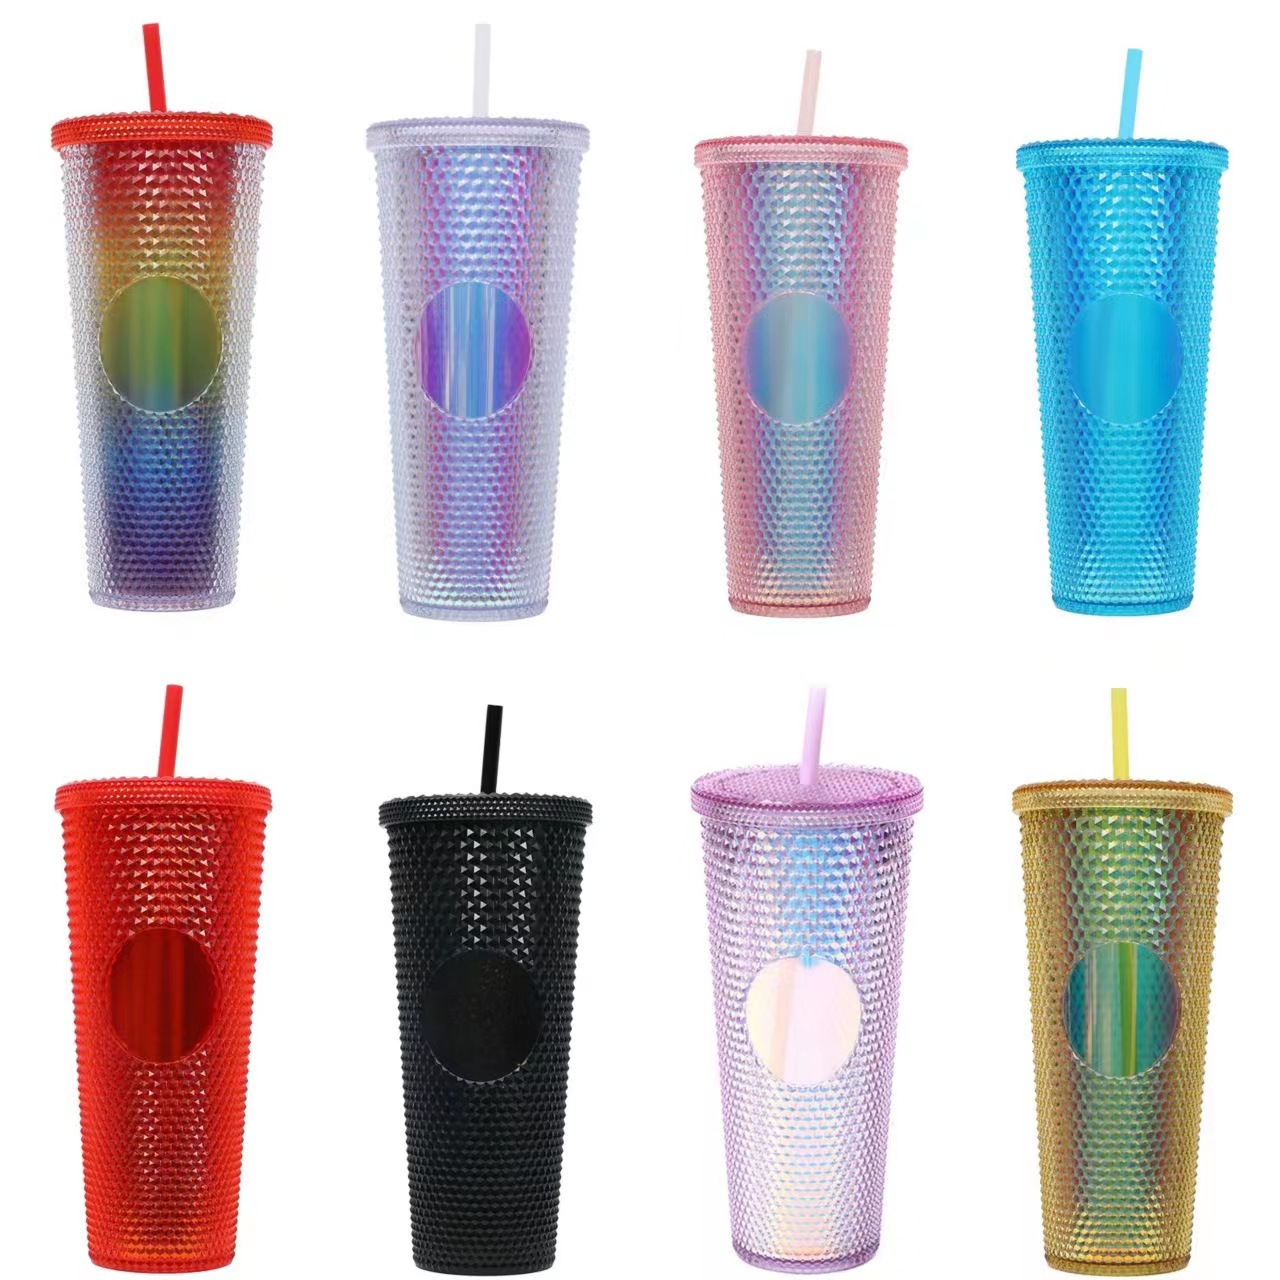 Asterisk Studded Durian Tie Cup 24 Oz710ml Double-Layer Plastic Cup Handy Cup with Straw Corn Durian Cup